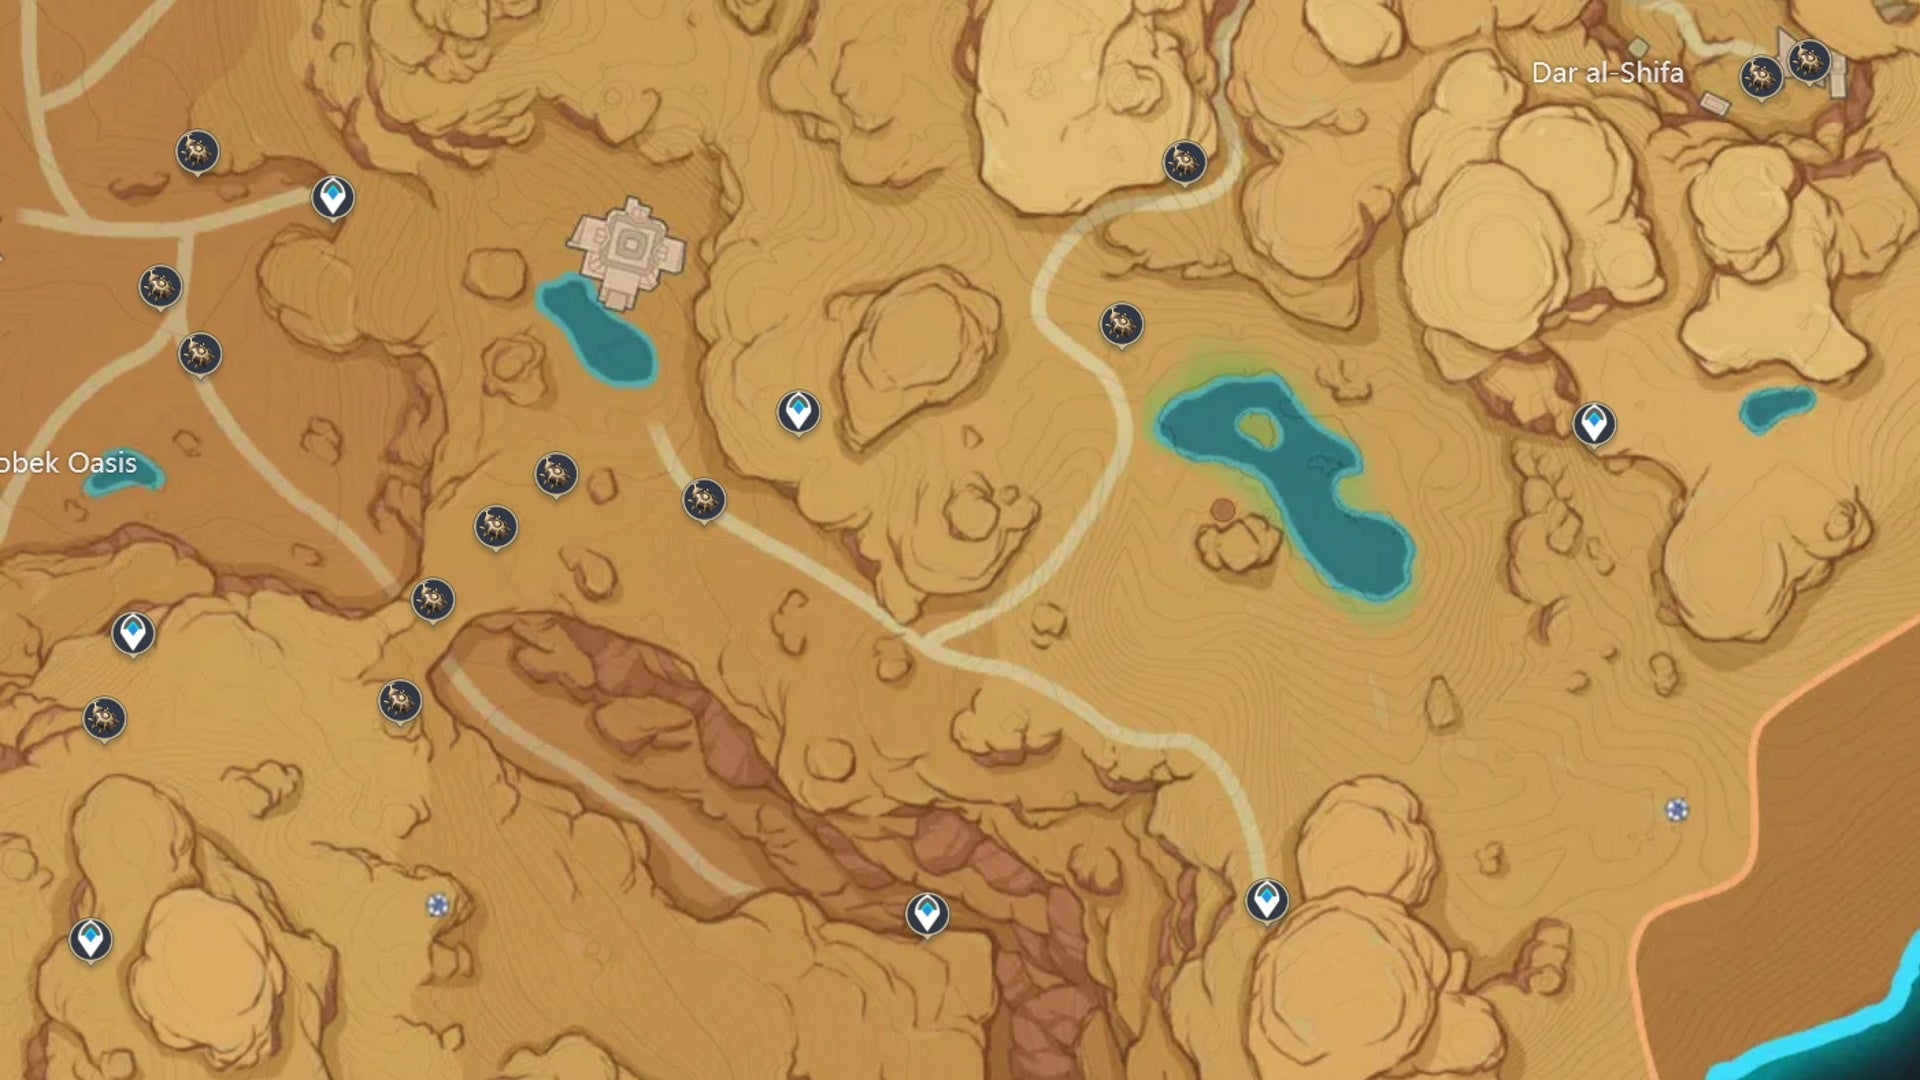 Genshin Impact Scarab locations: A map image showing Sobek Oasis scarab locations